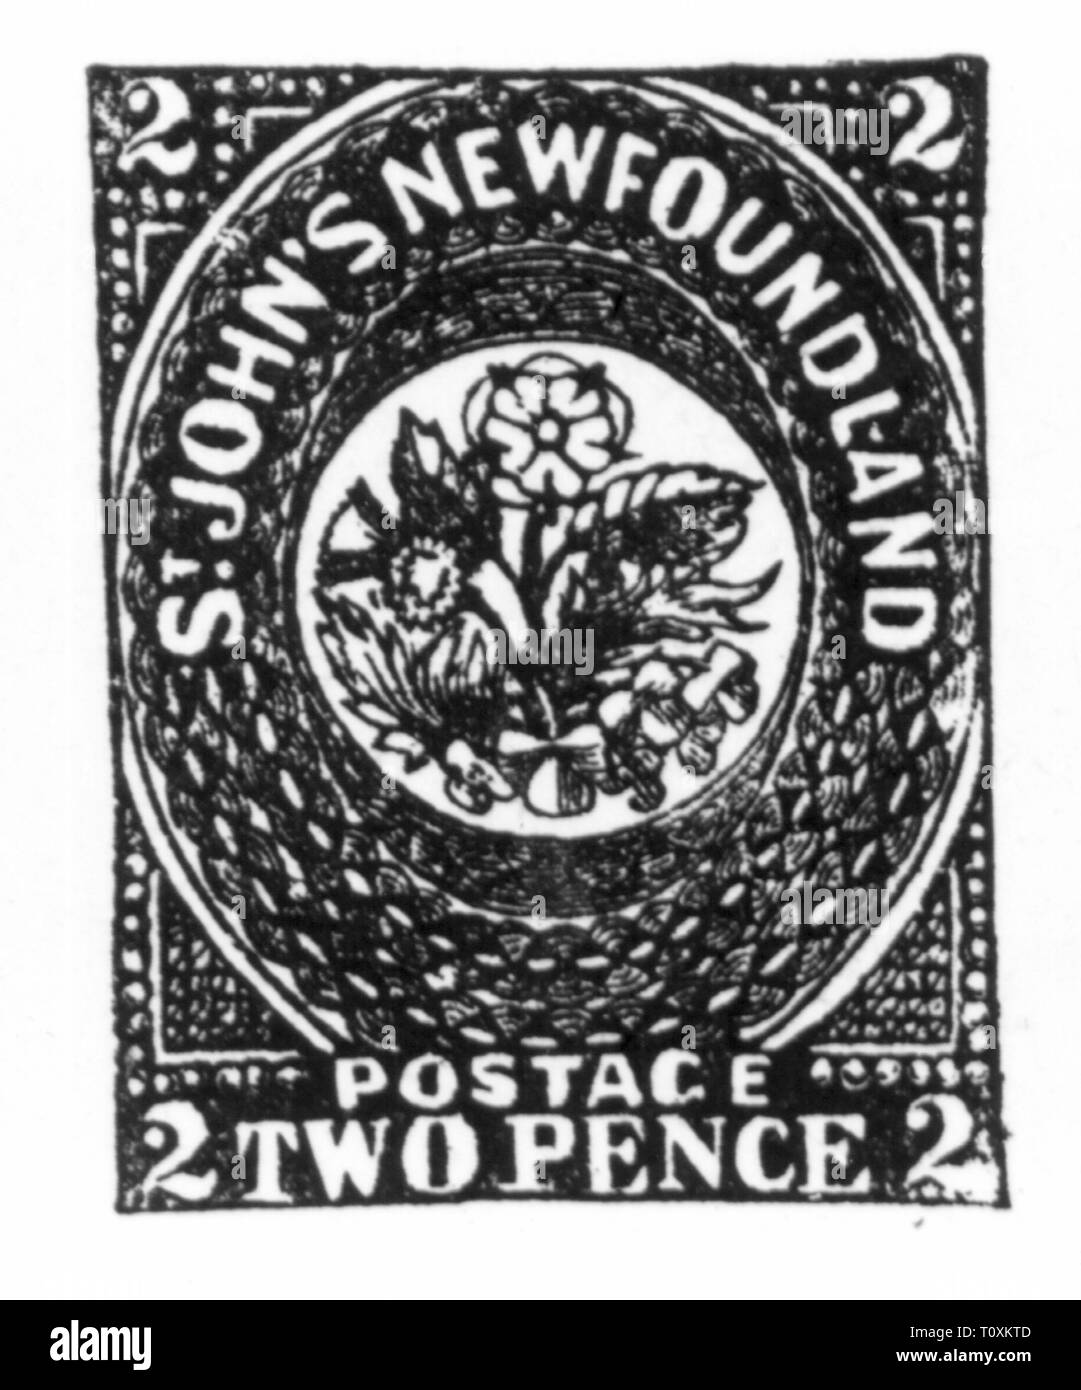 Mail, Briefmarken, Canada, Newfoundland, St. John's, 2 Pence Briefmarke, Stand: 15.9.1860, Additional-Rights - Clearance-Info - Not-Available Stockfoto